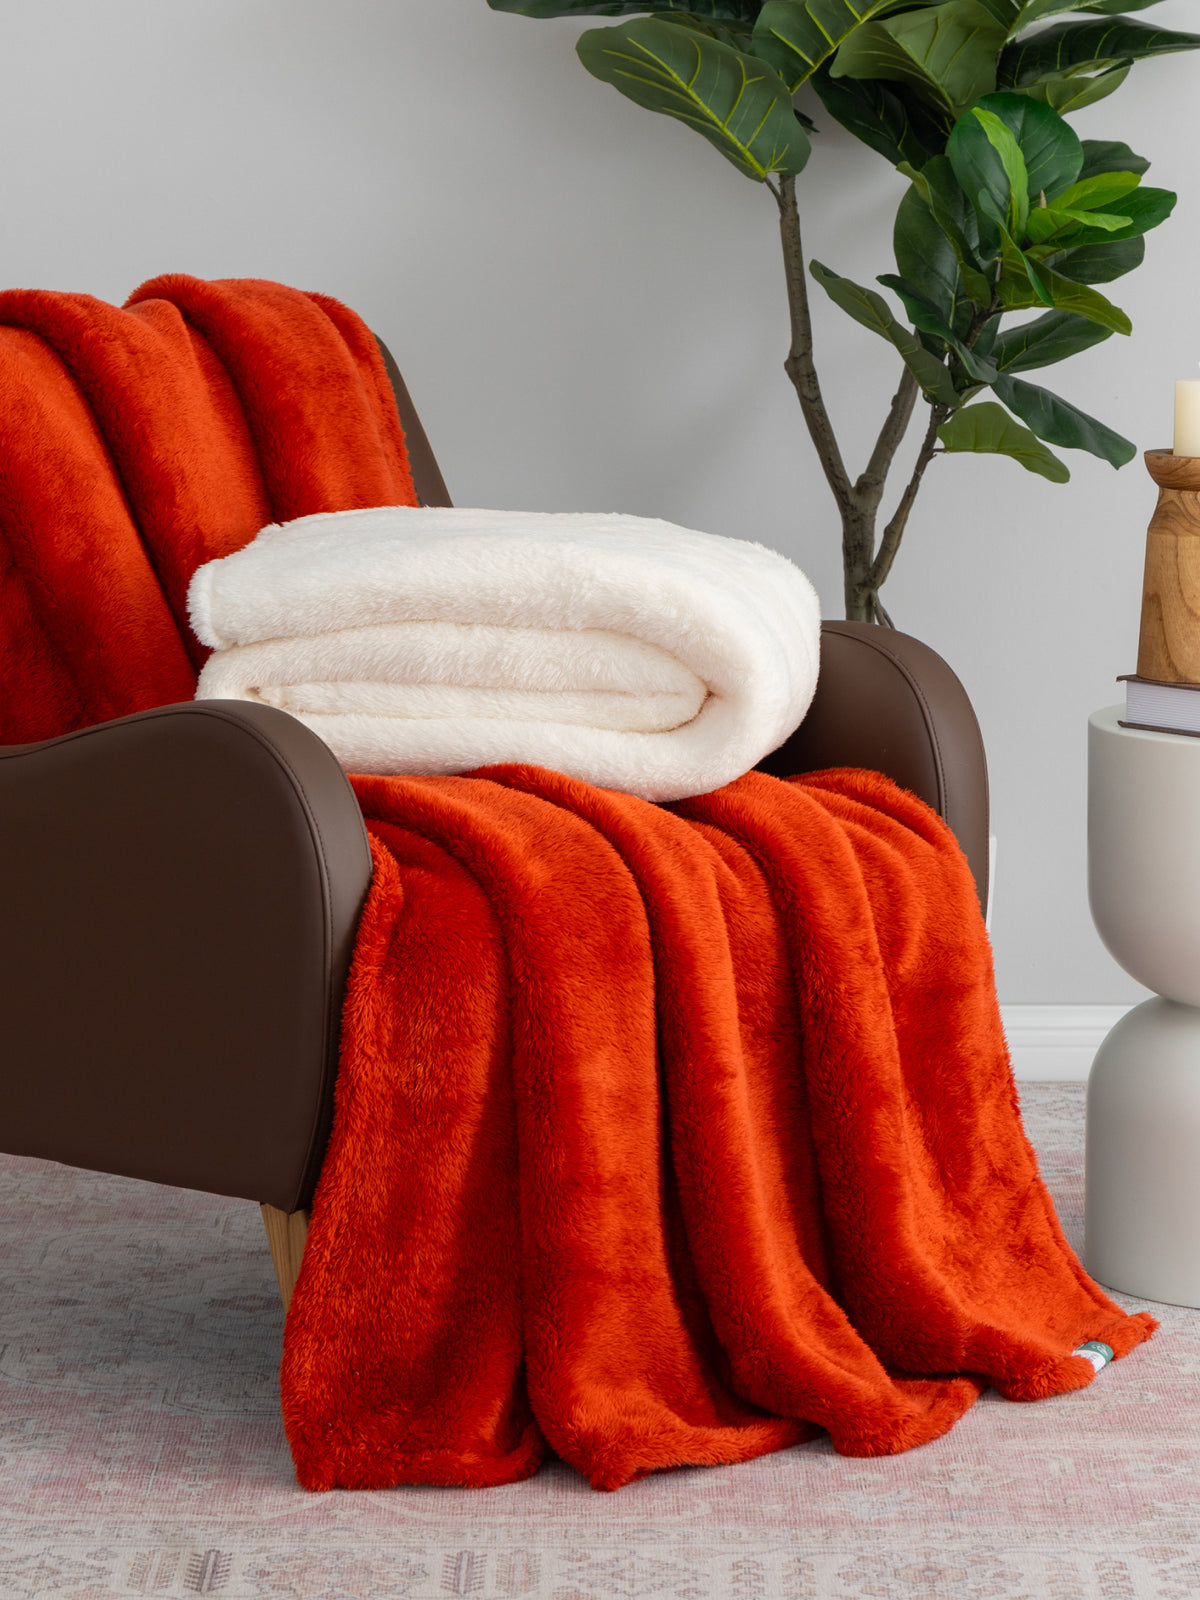 Extra-Fluffy collection image featuring our Extra-Fluffy 2pk in Hot Sauce draped over a brown leather chair.